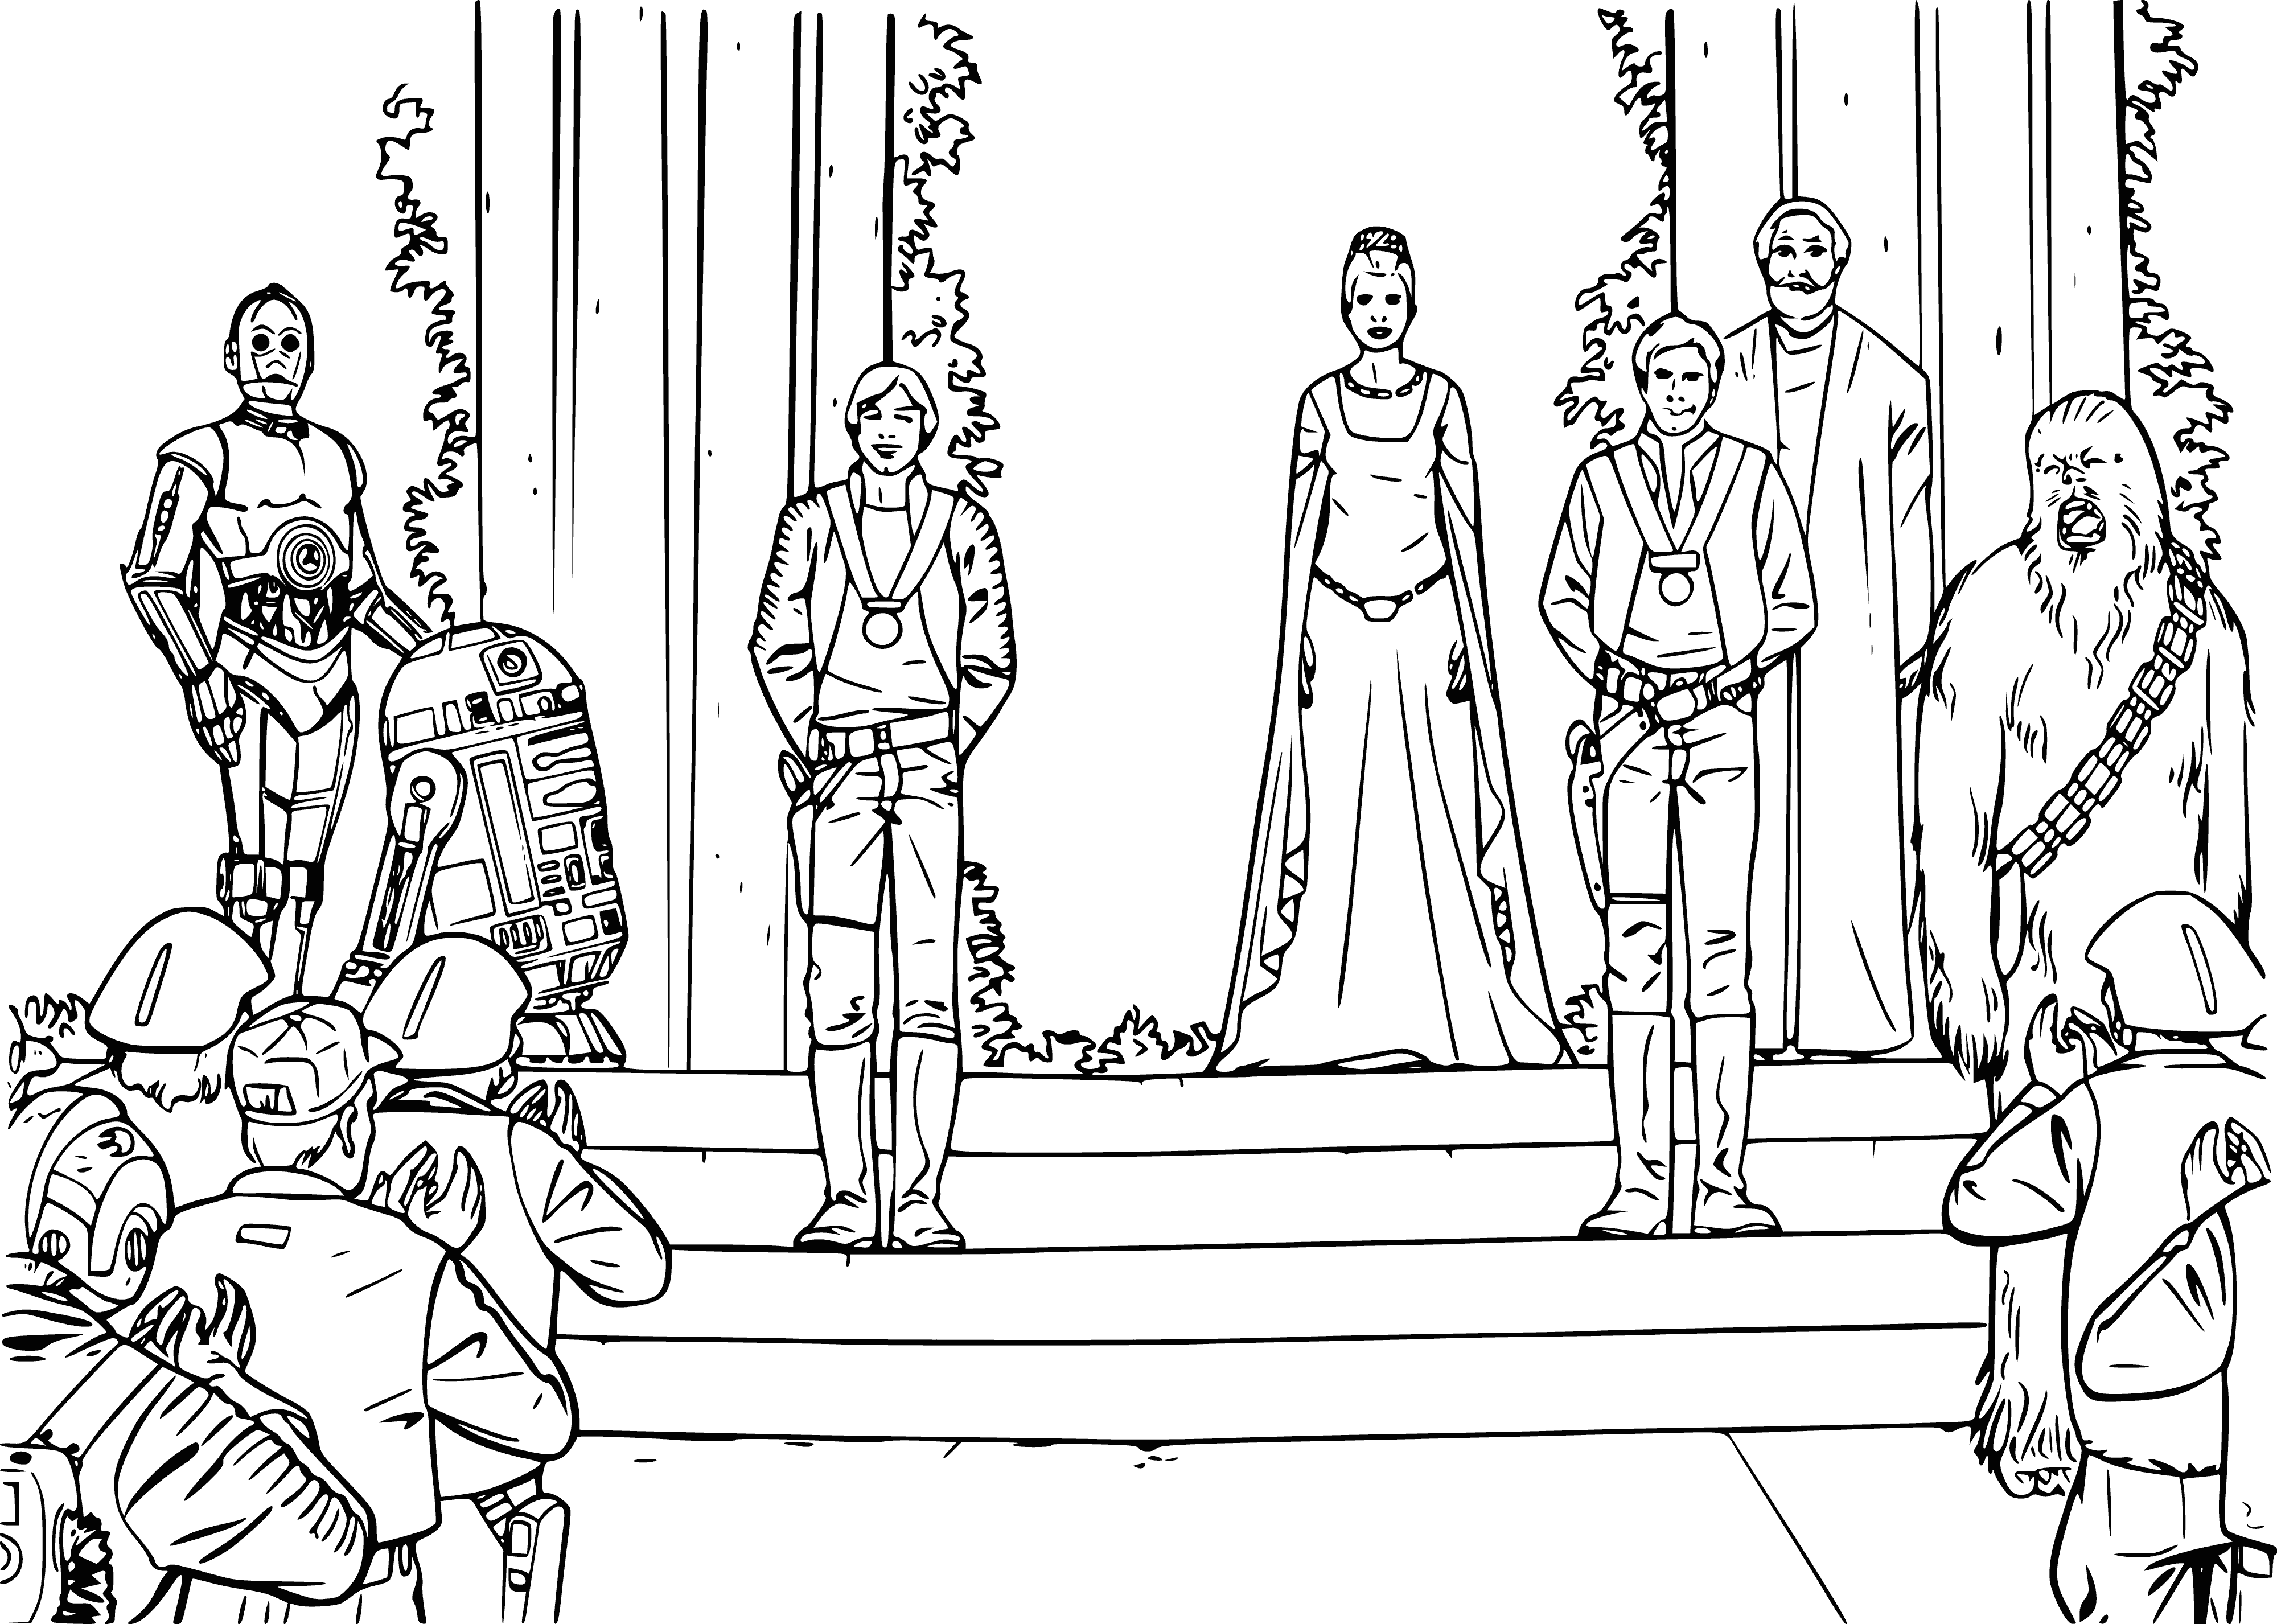 coloring page: Crowds cheering & waving flags in the city, celebrating the figure with a sword in the center. #Celebration